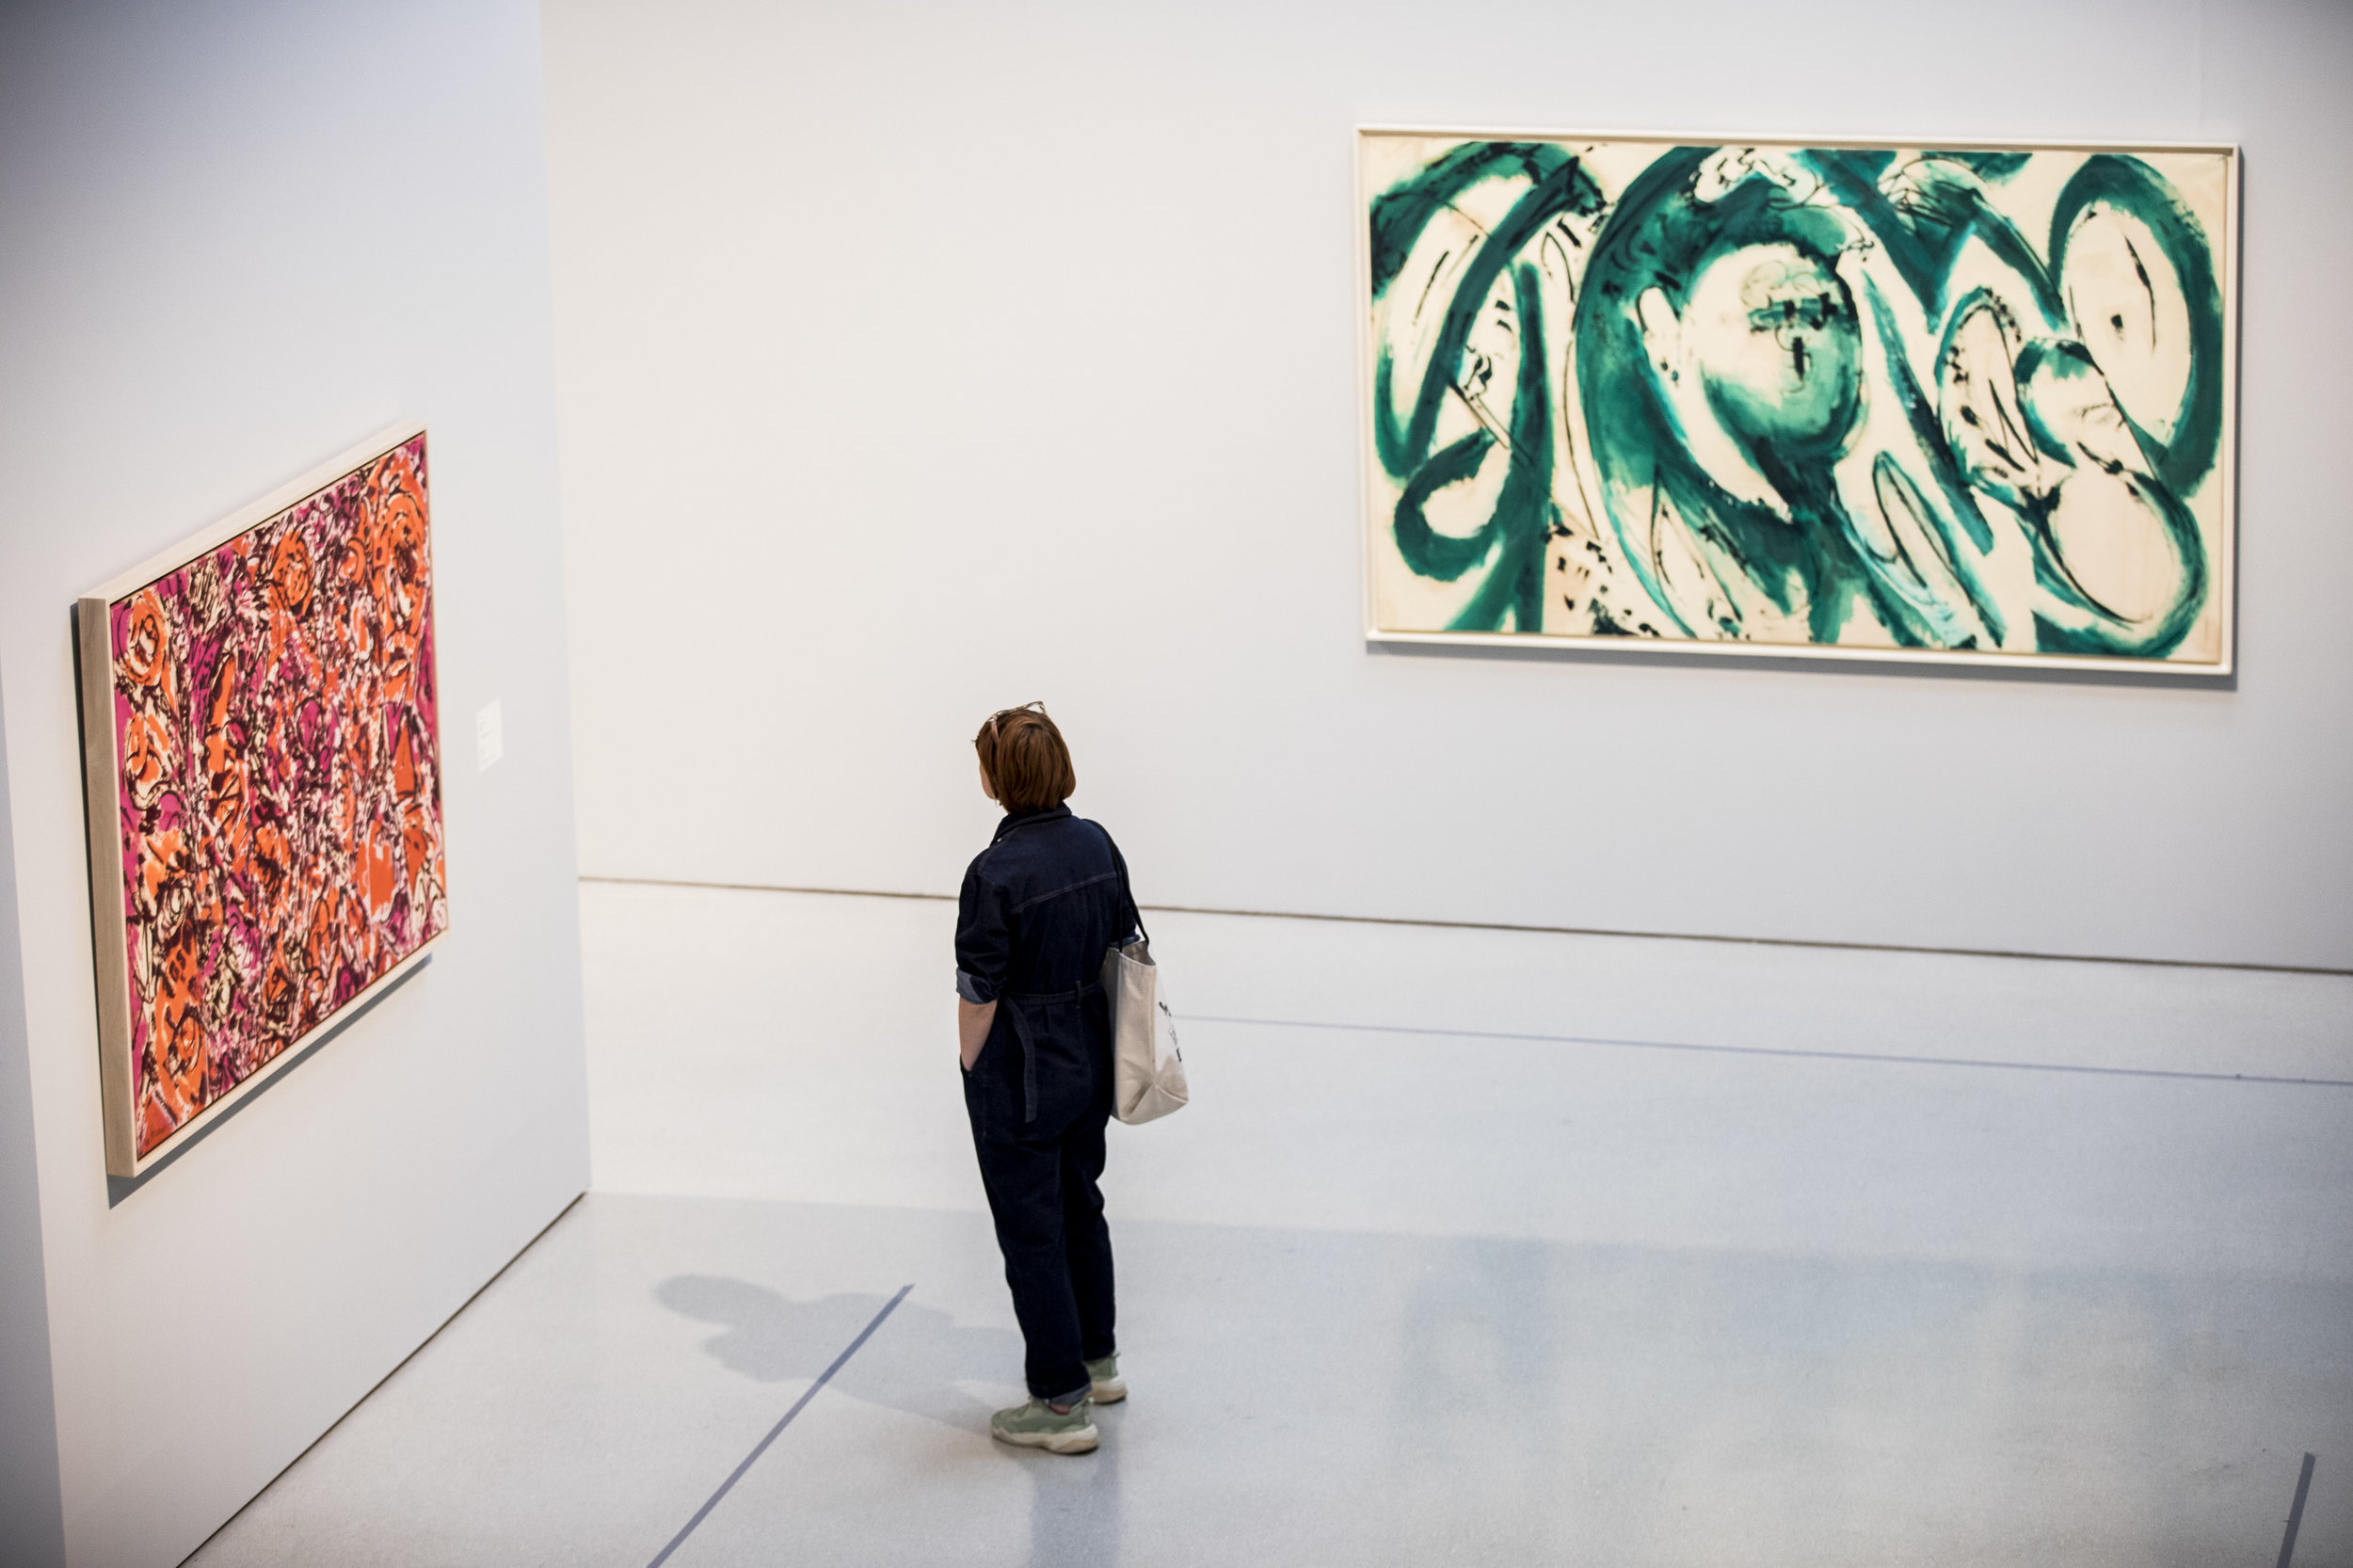  Lee Krasner: Living Colour Installation View with Chrysalis, 1964 and Portrait in Green, 1969 Barbican Art Gallery 30 May–1 September 2019 © Tristan Fewings/Getty Images 